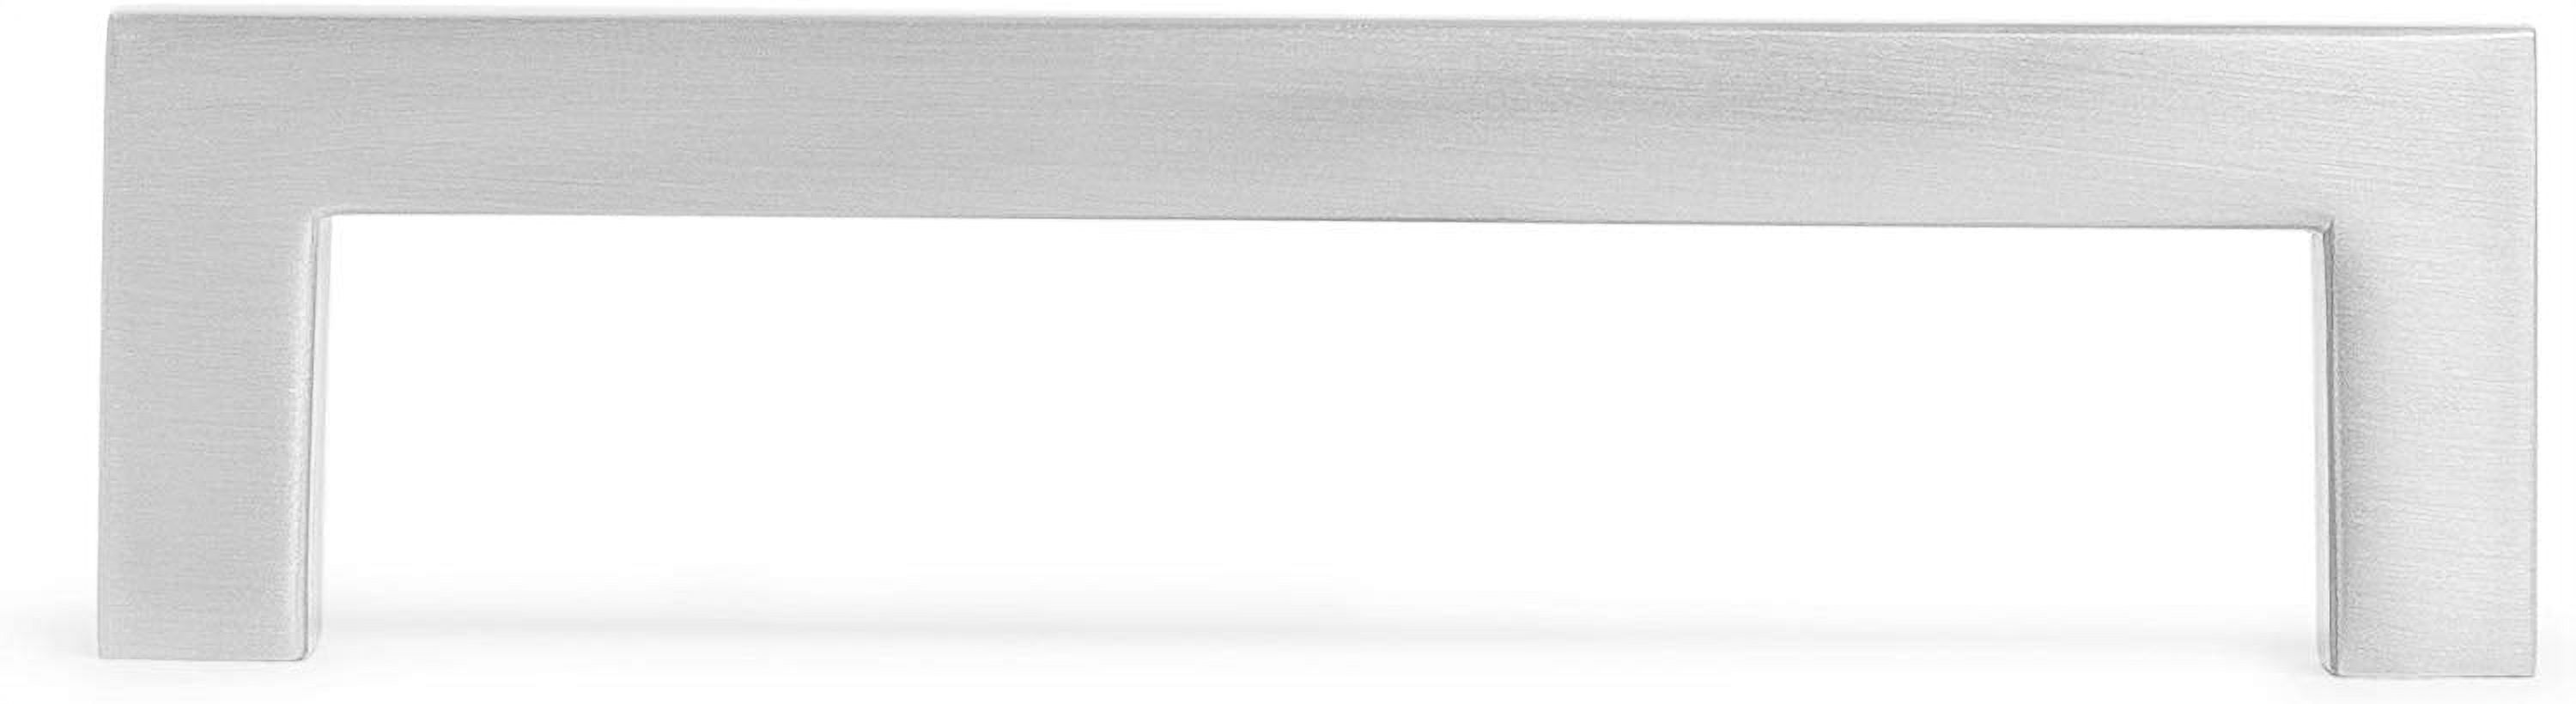 BirdRock Home Square Contemporary Handle - Brushed Nickel - 25 Pack - image 2 of 6